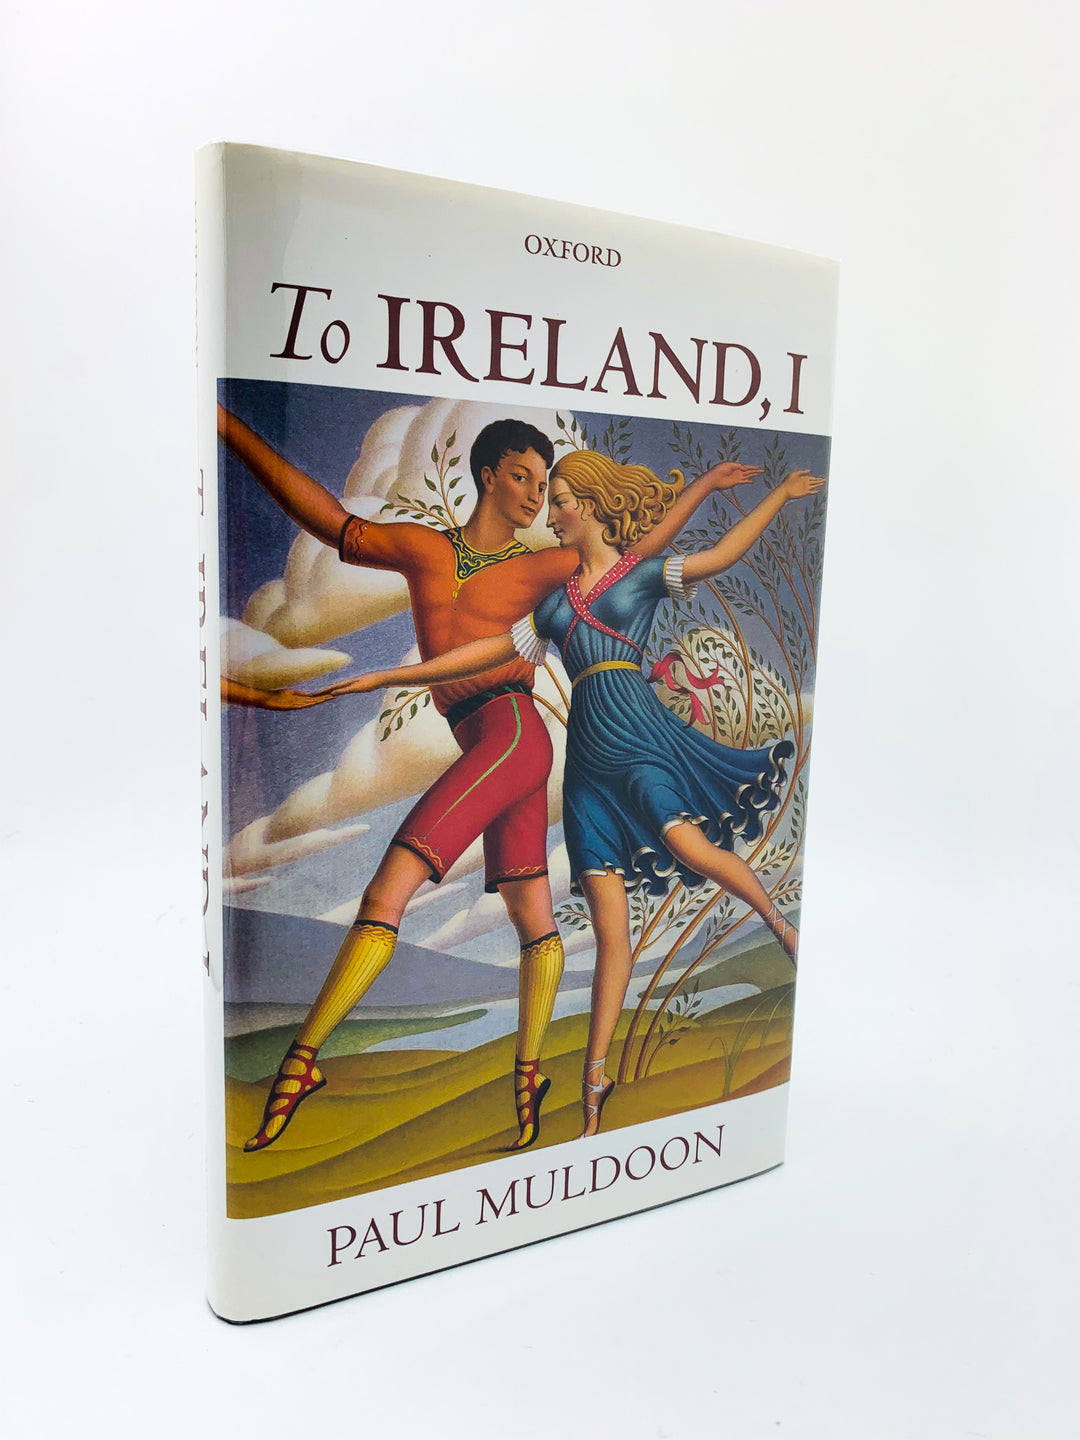 Muldoon, Paul - To Ireland, I | front cover